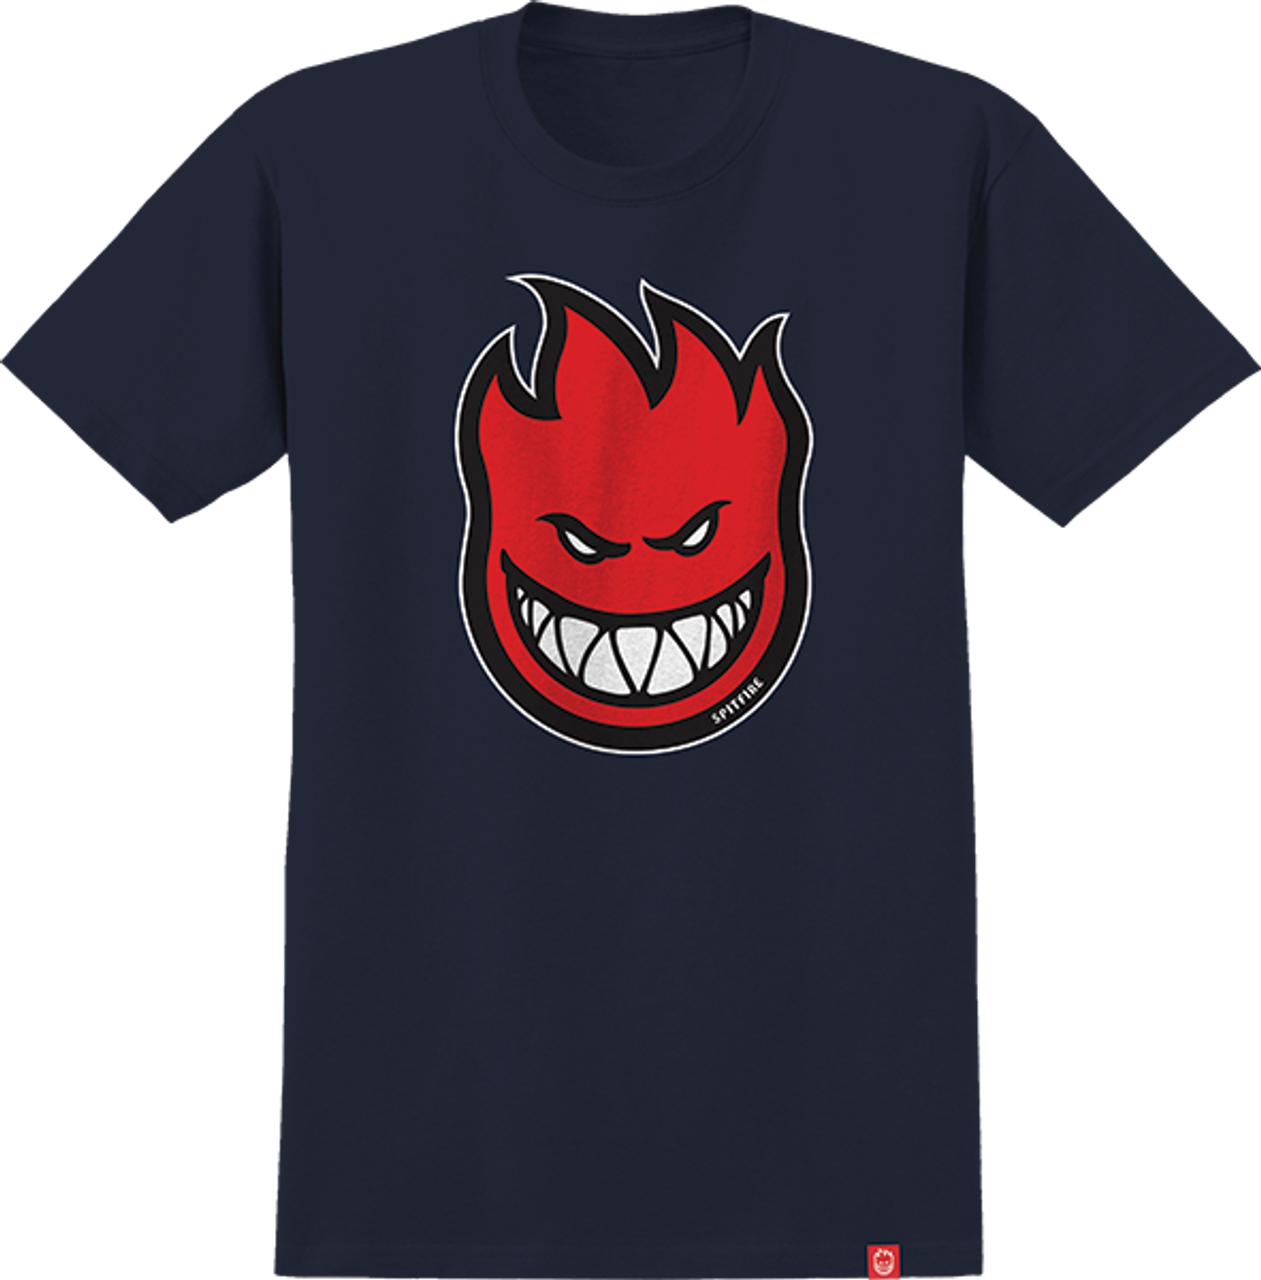 SPITFIRE BIGHEAD FILL YOUTH SS TSHIRT SMALL NAVY/RED